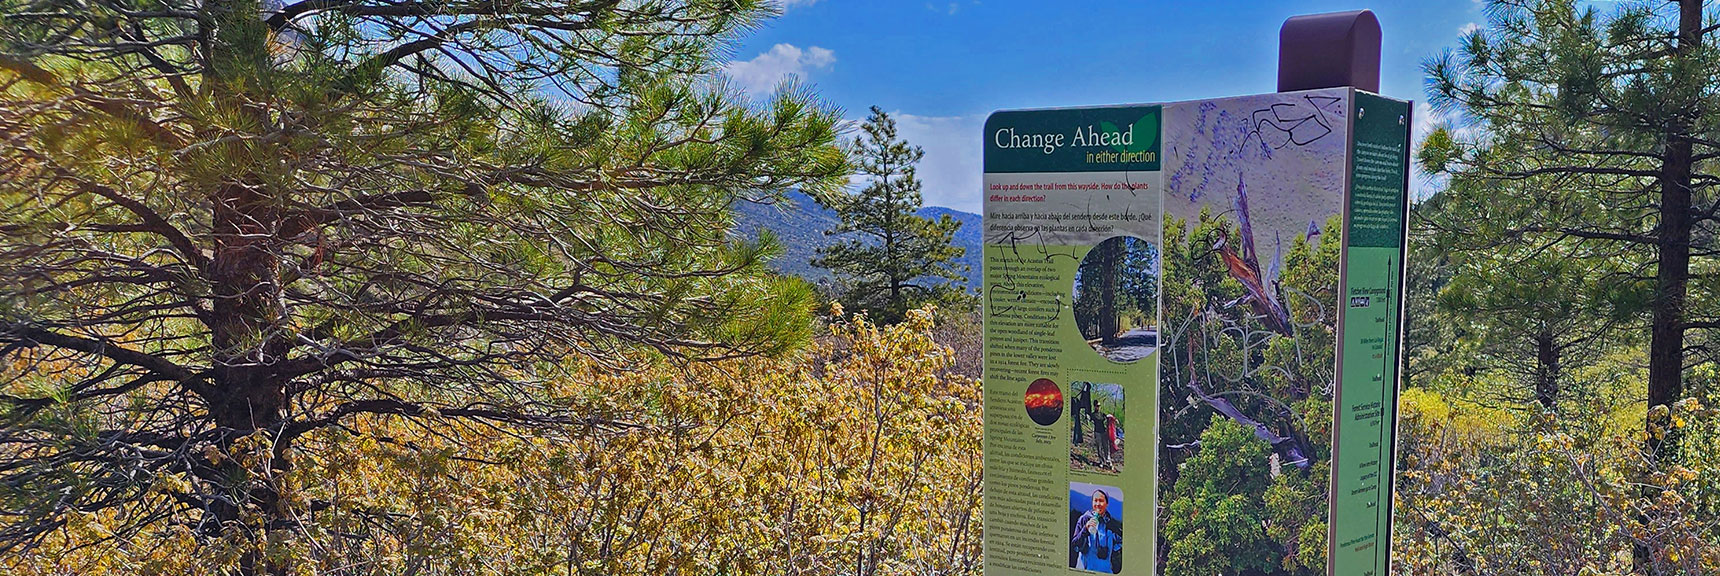 Climate Transition Zone from Ponderosa Forest Above to Drought Resistant Plants Below | Acastus Trail | Mt Charleston Wilderness | Spring Mountains, Nevada